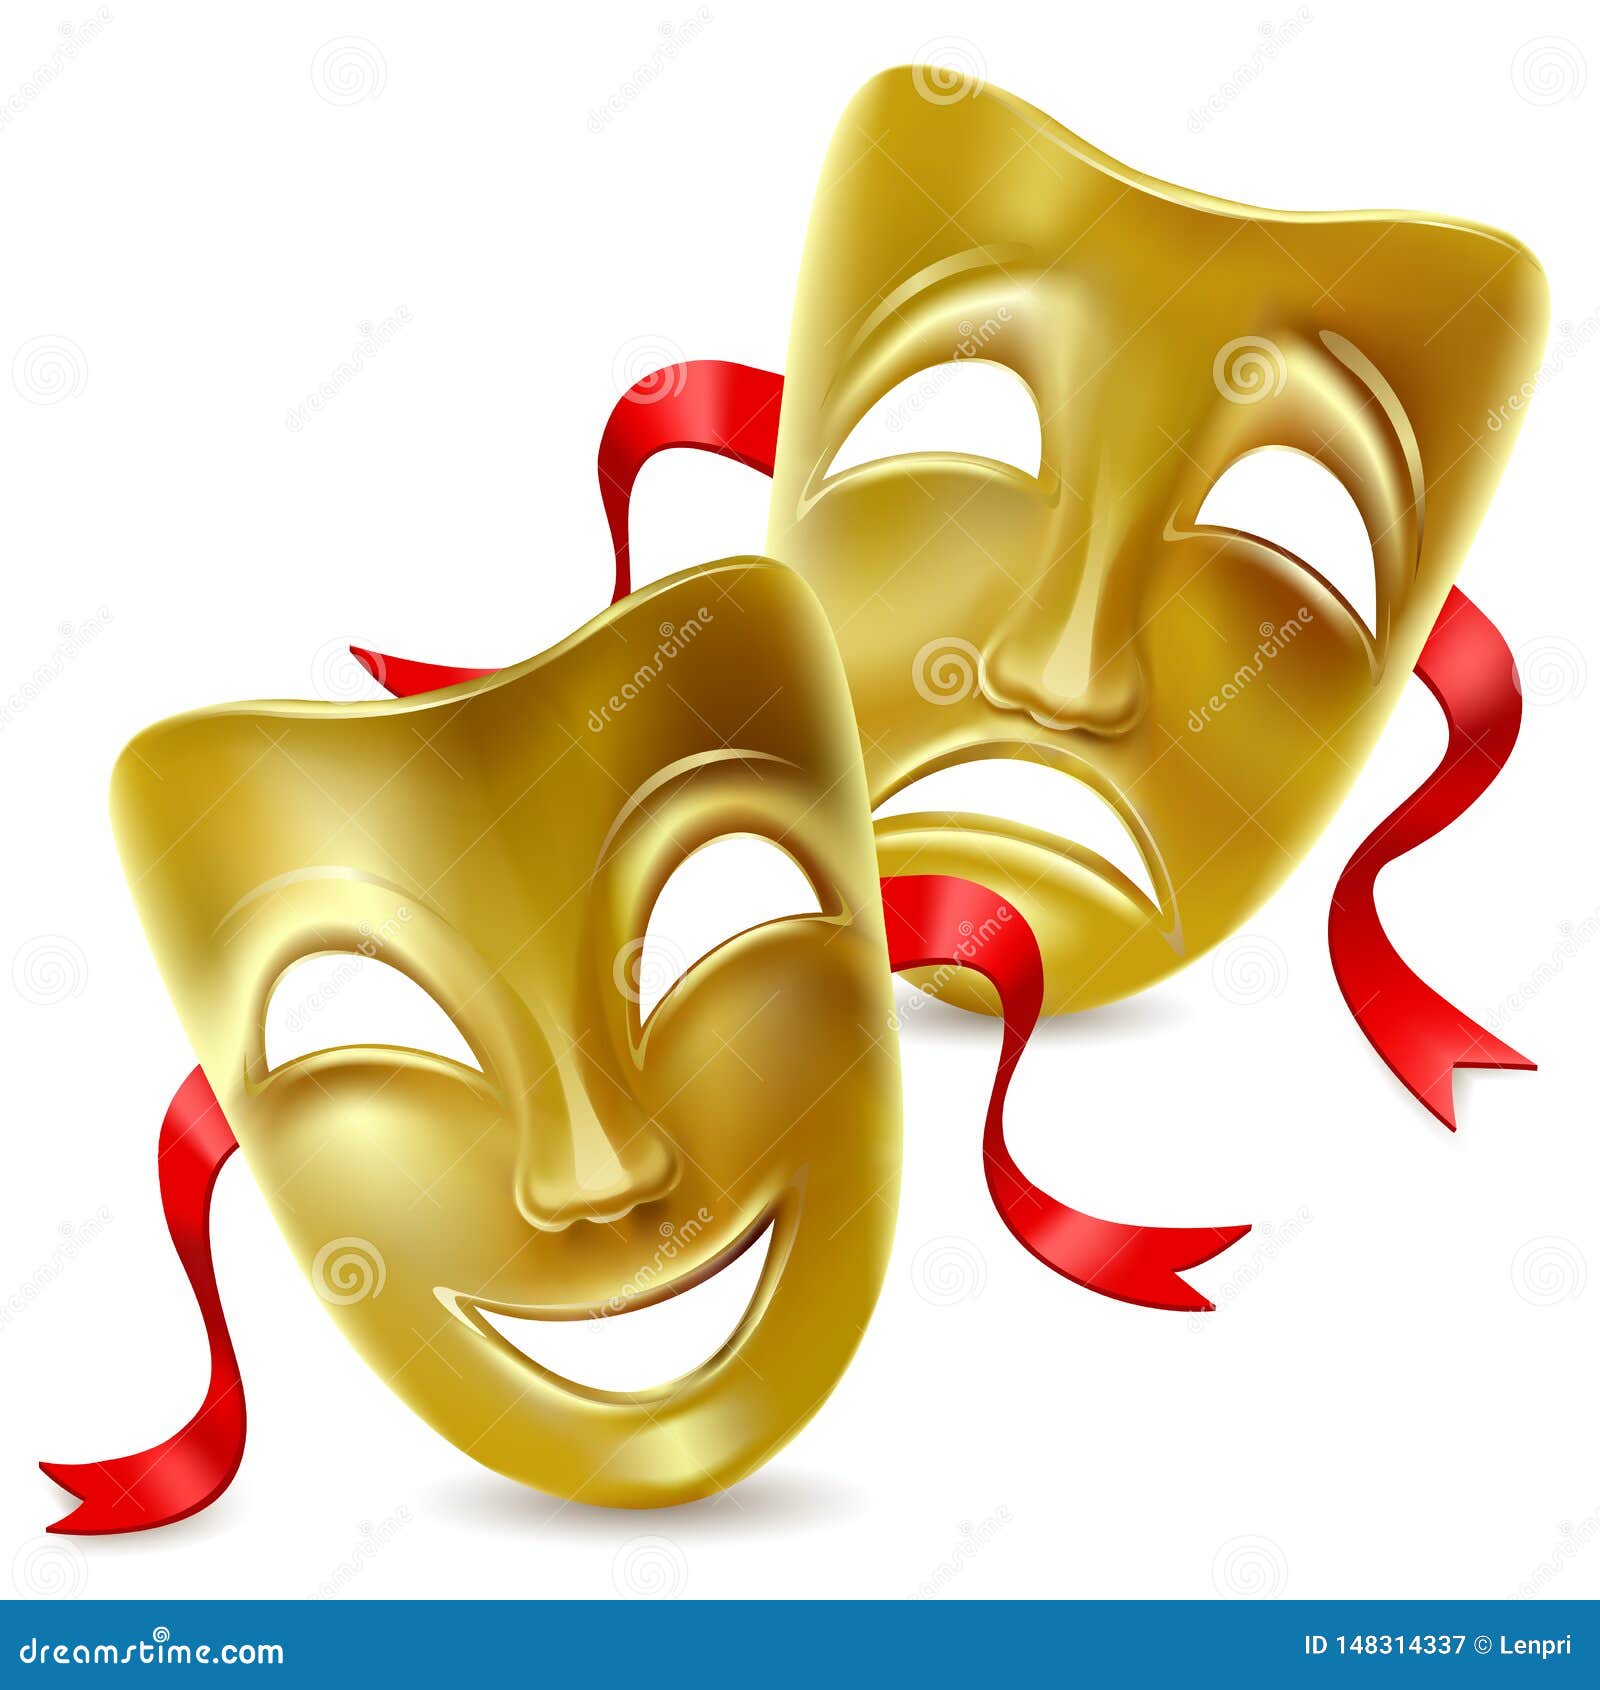 theatrical masks.